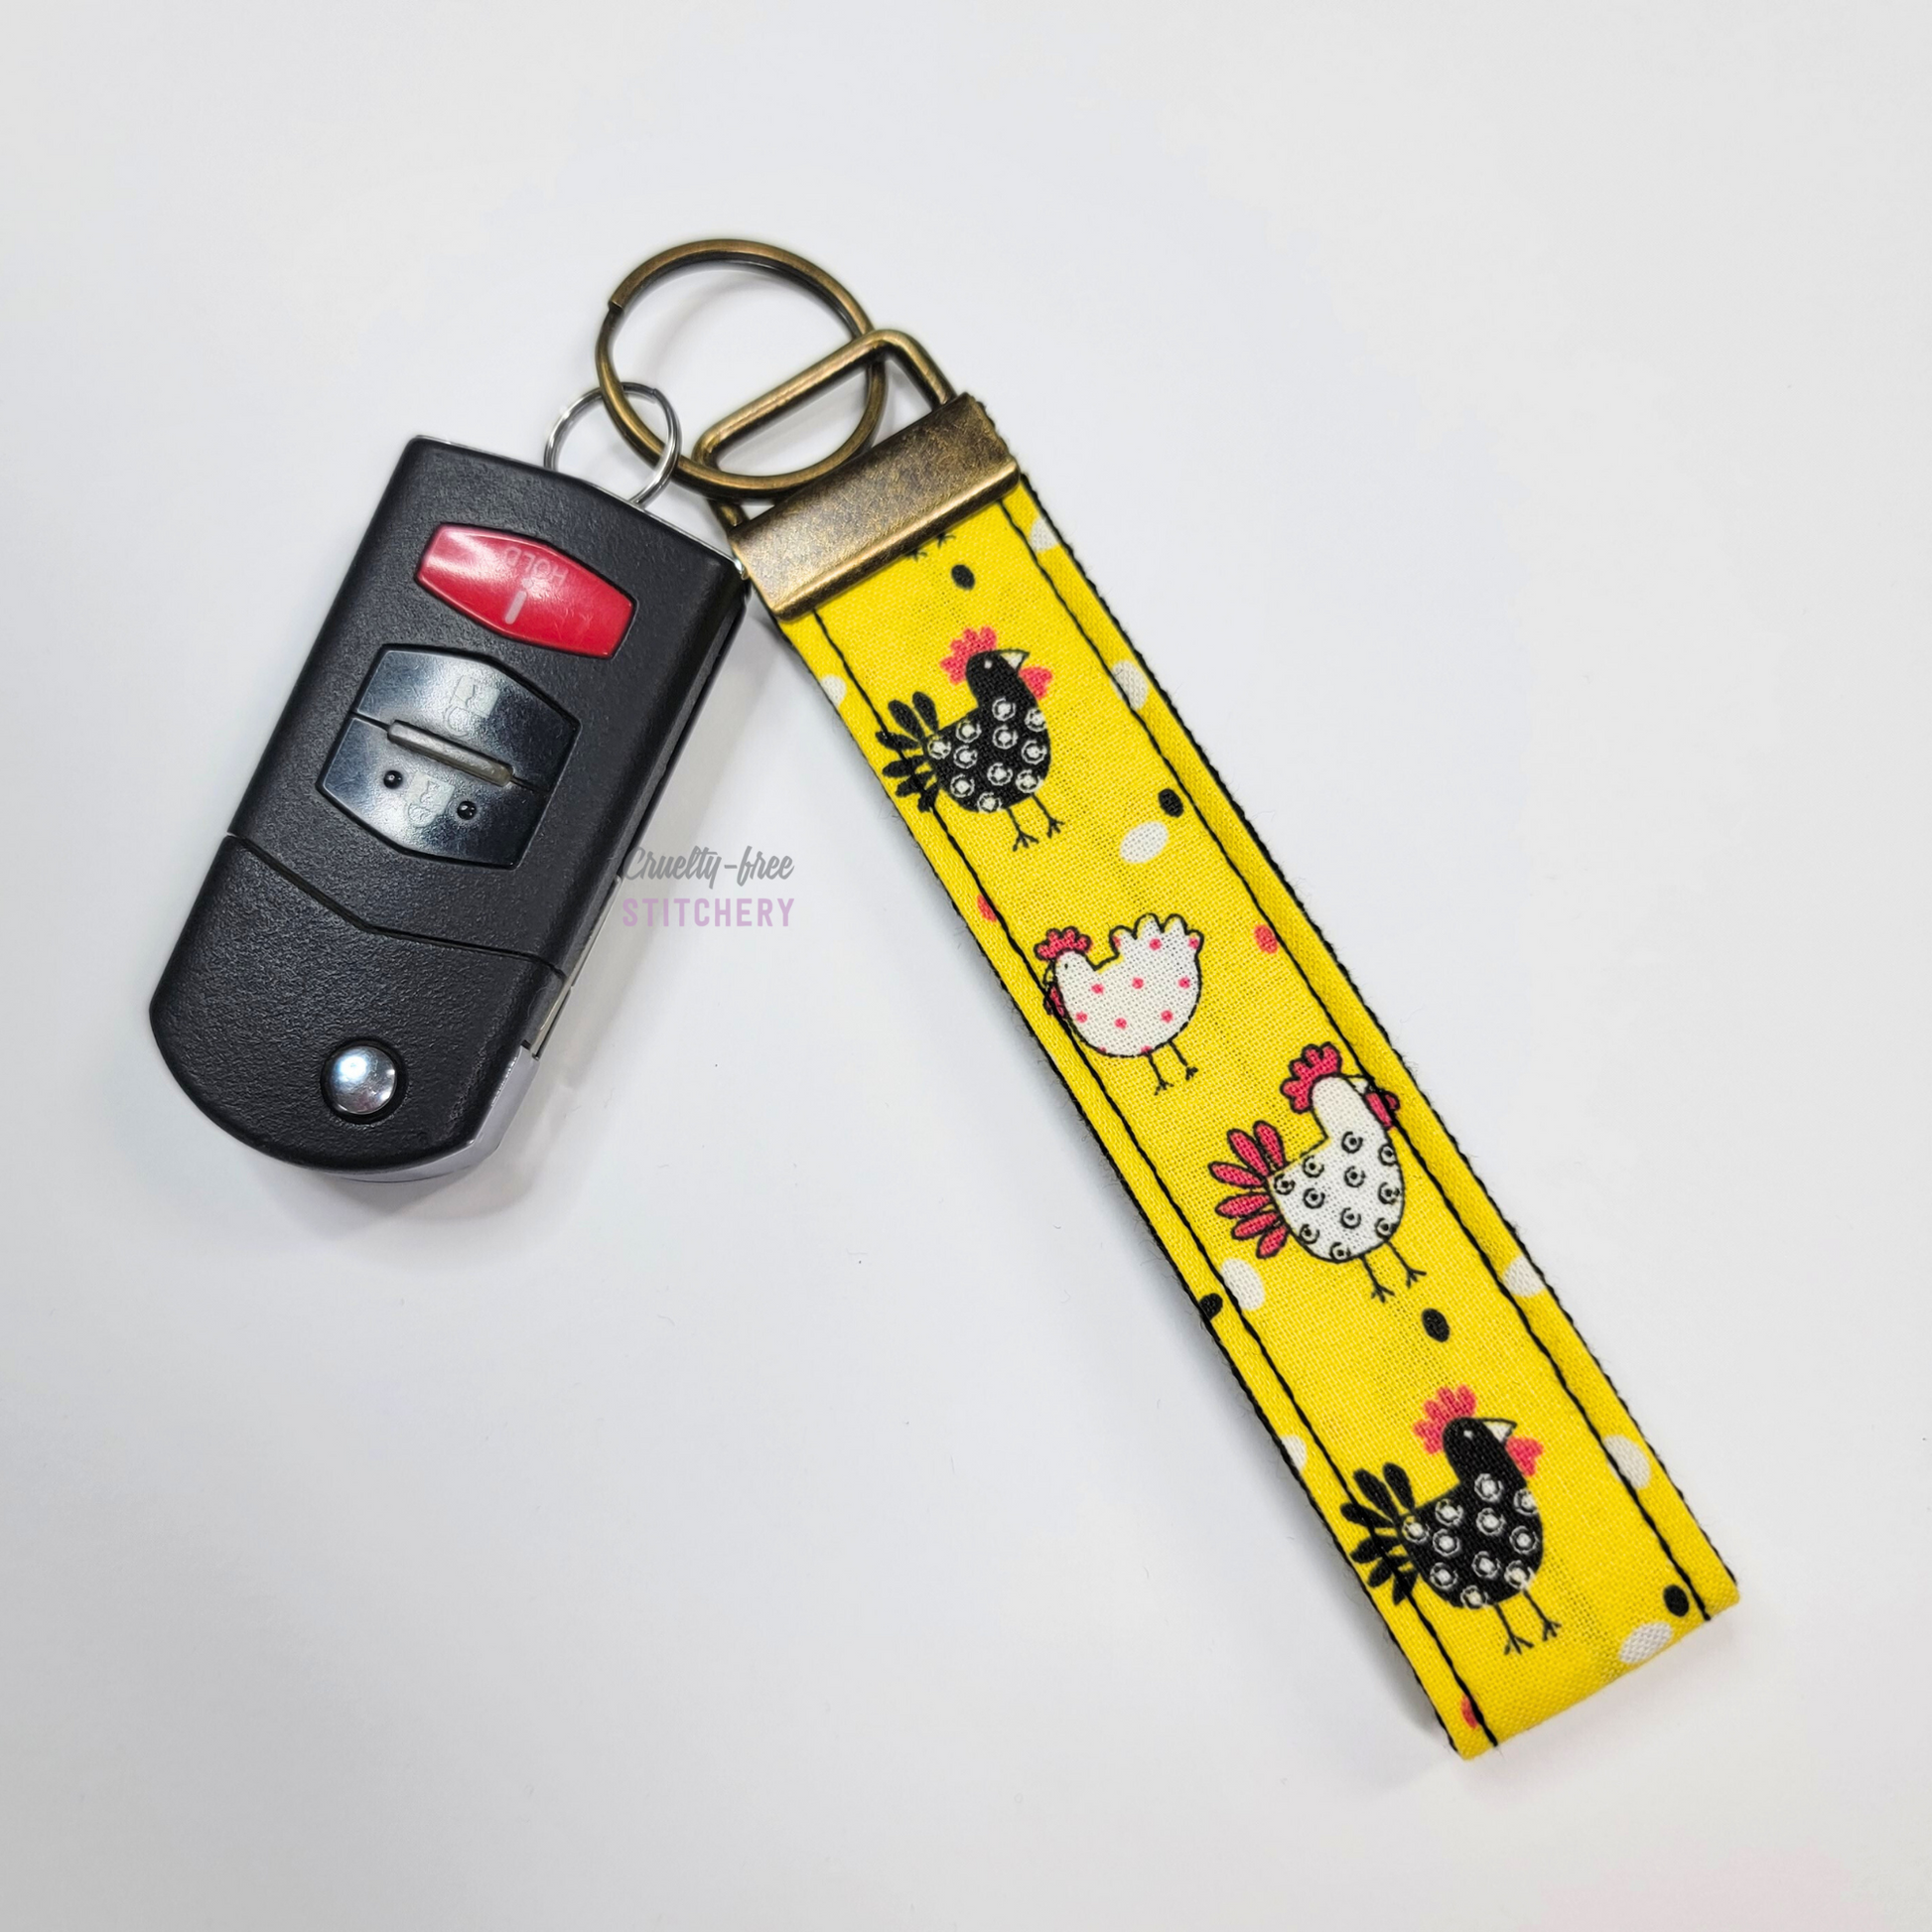 The yellow chickens key fob attached to a car key.